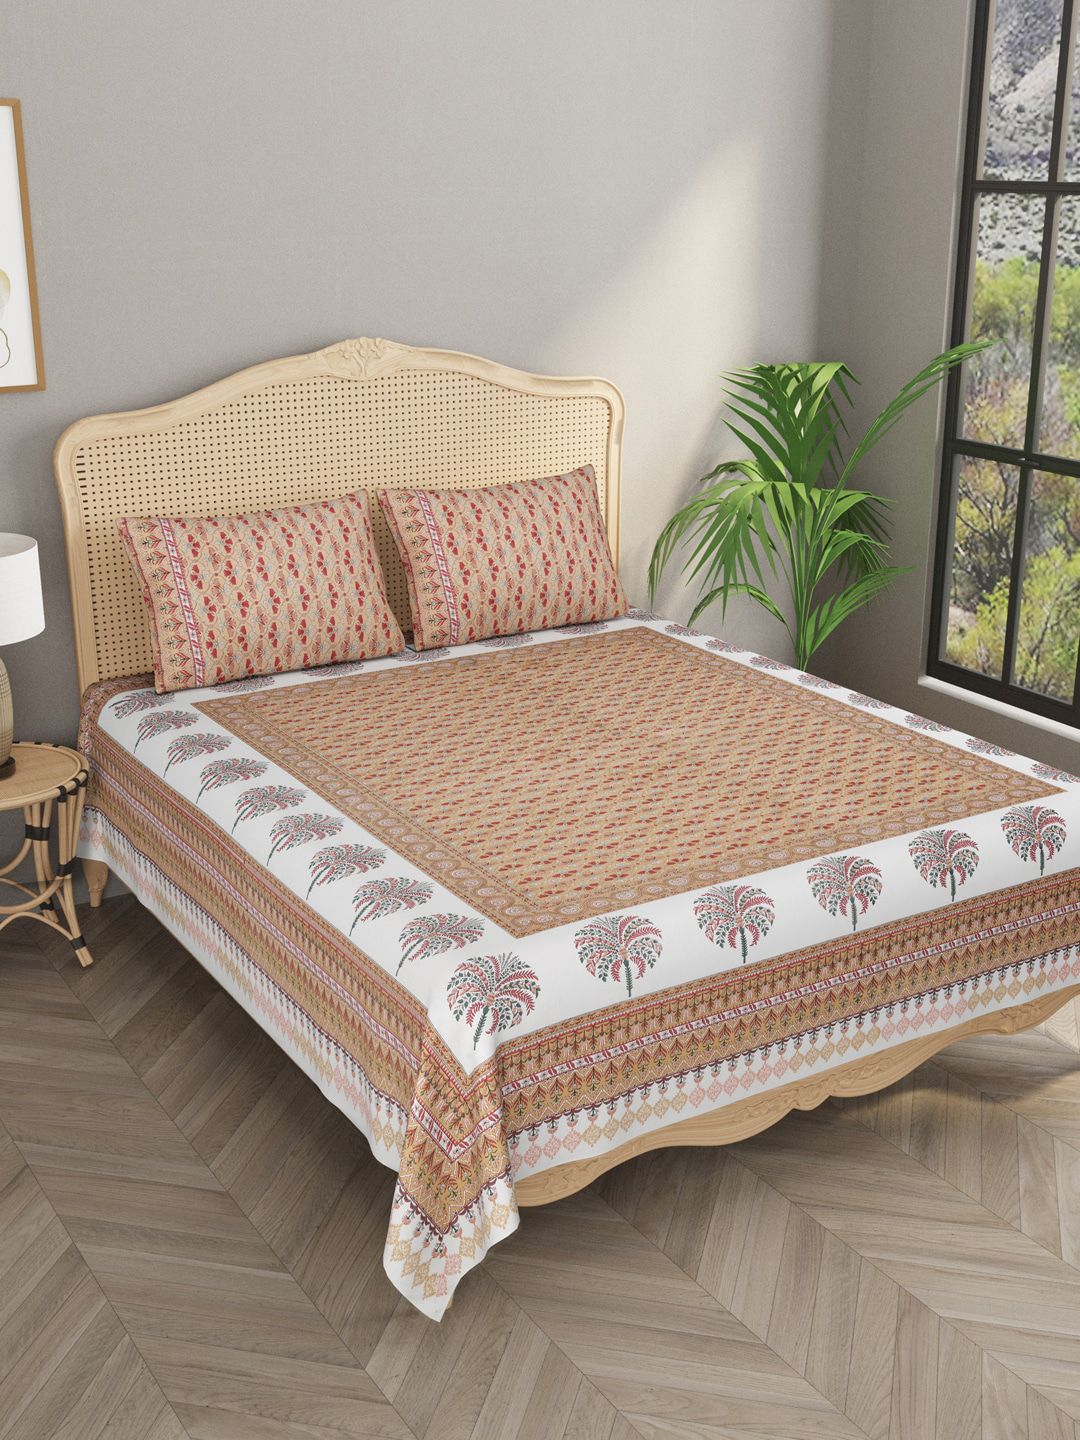 Gulaab Jaipur Beige & White Ethnic Motifs 600 TC King Bedsheet with 2 Pillow Covers Price in India